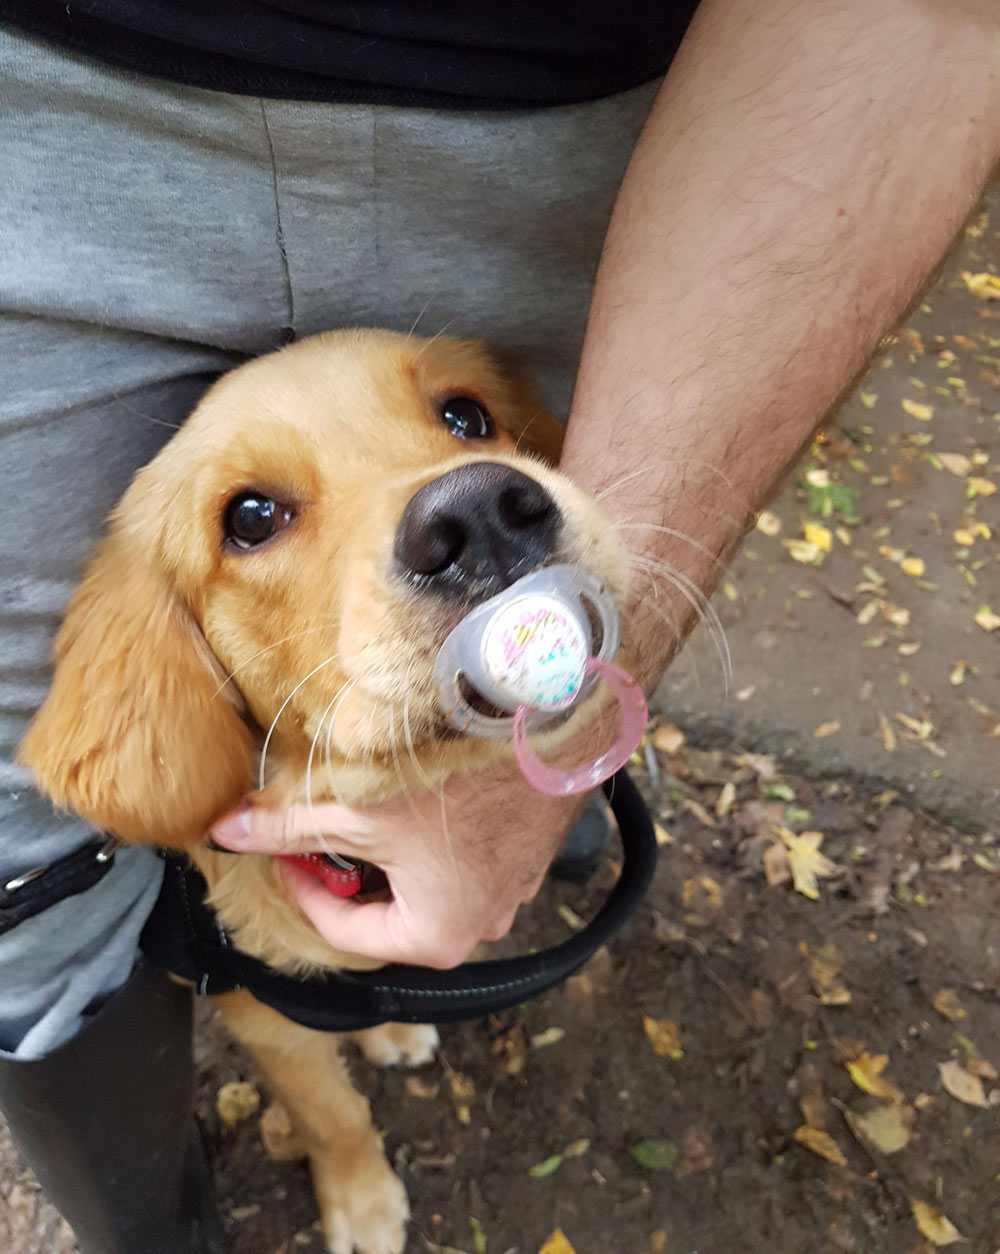 Our puppy picked something up on his walk